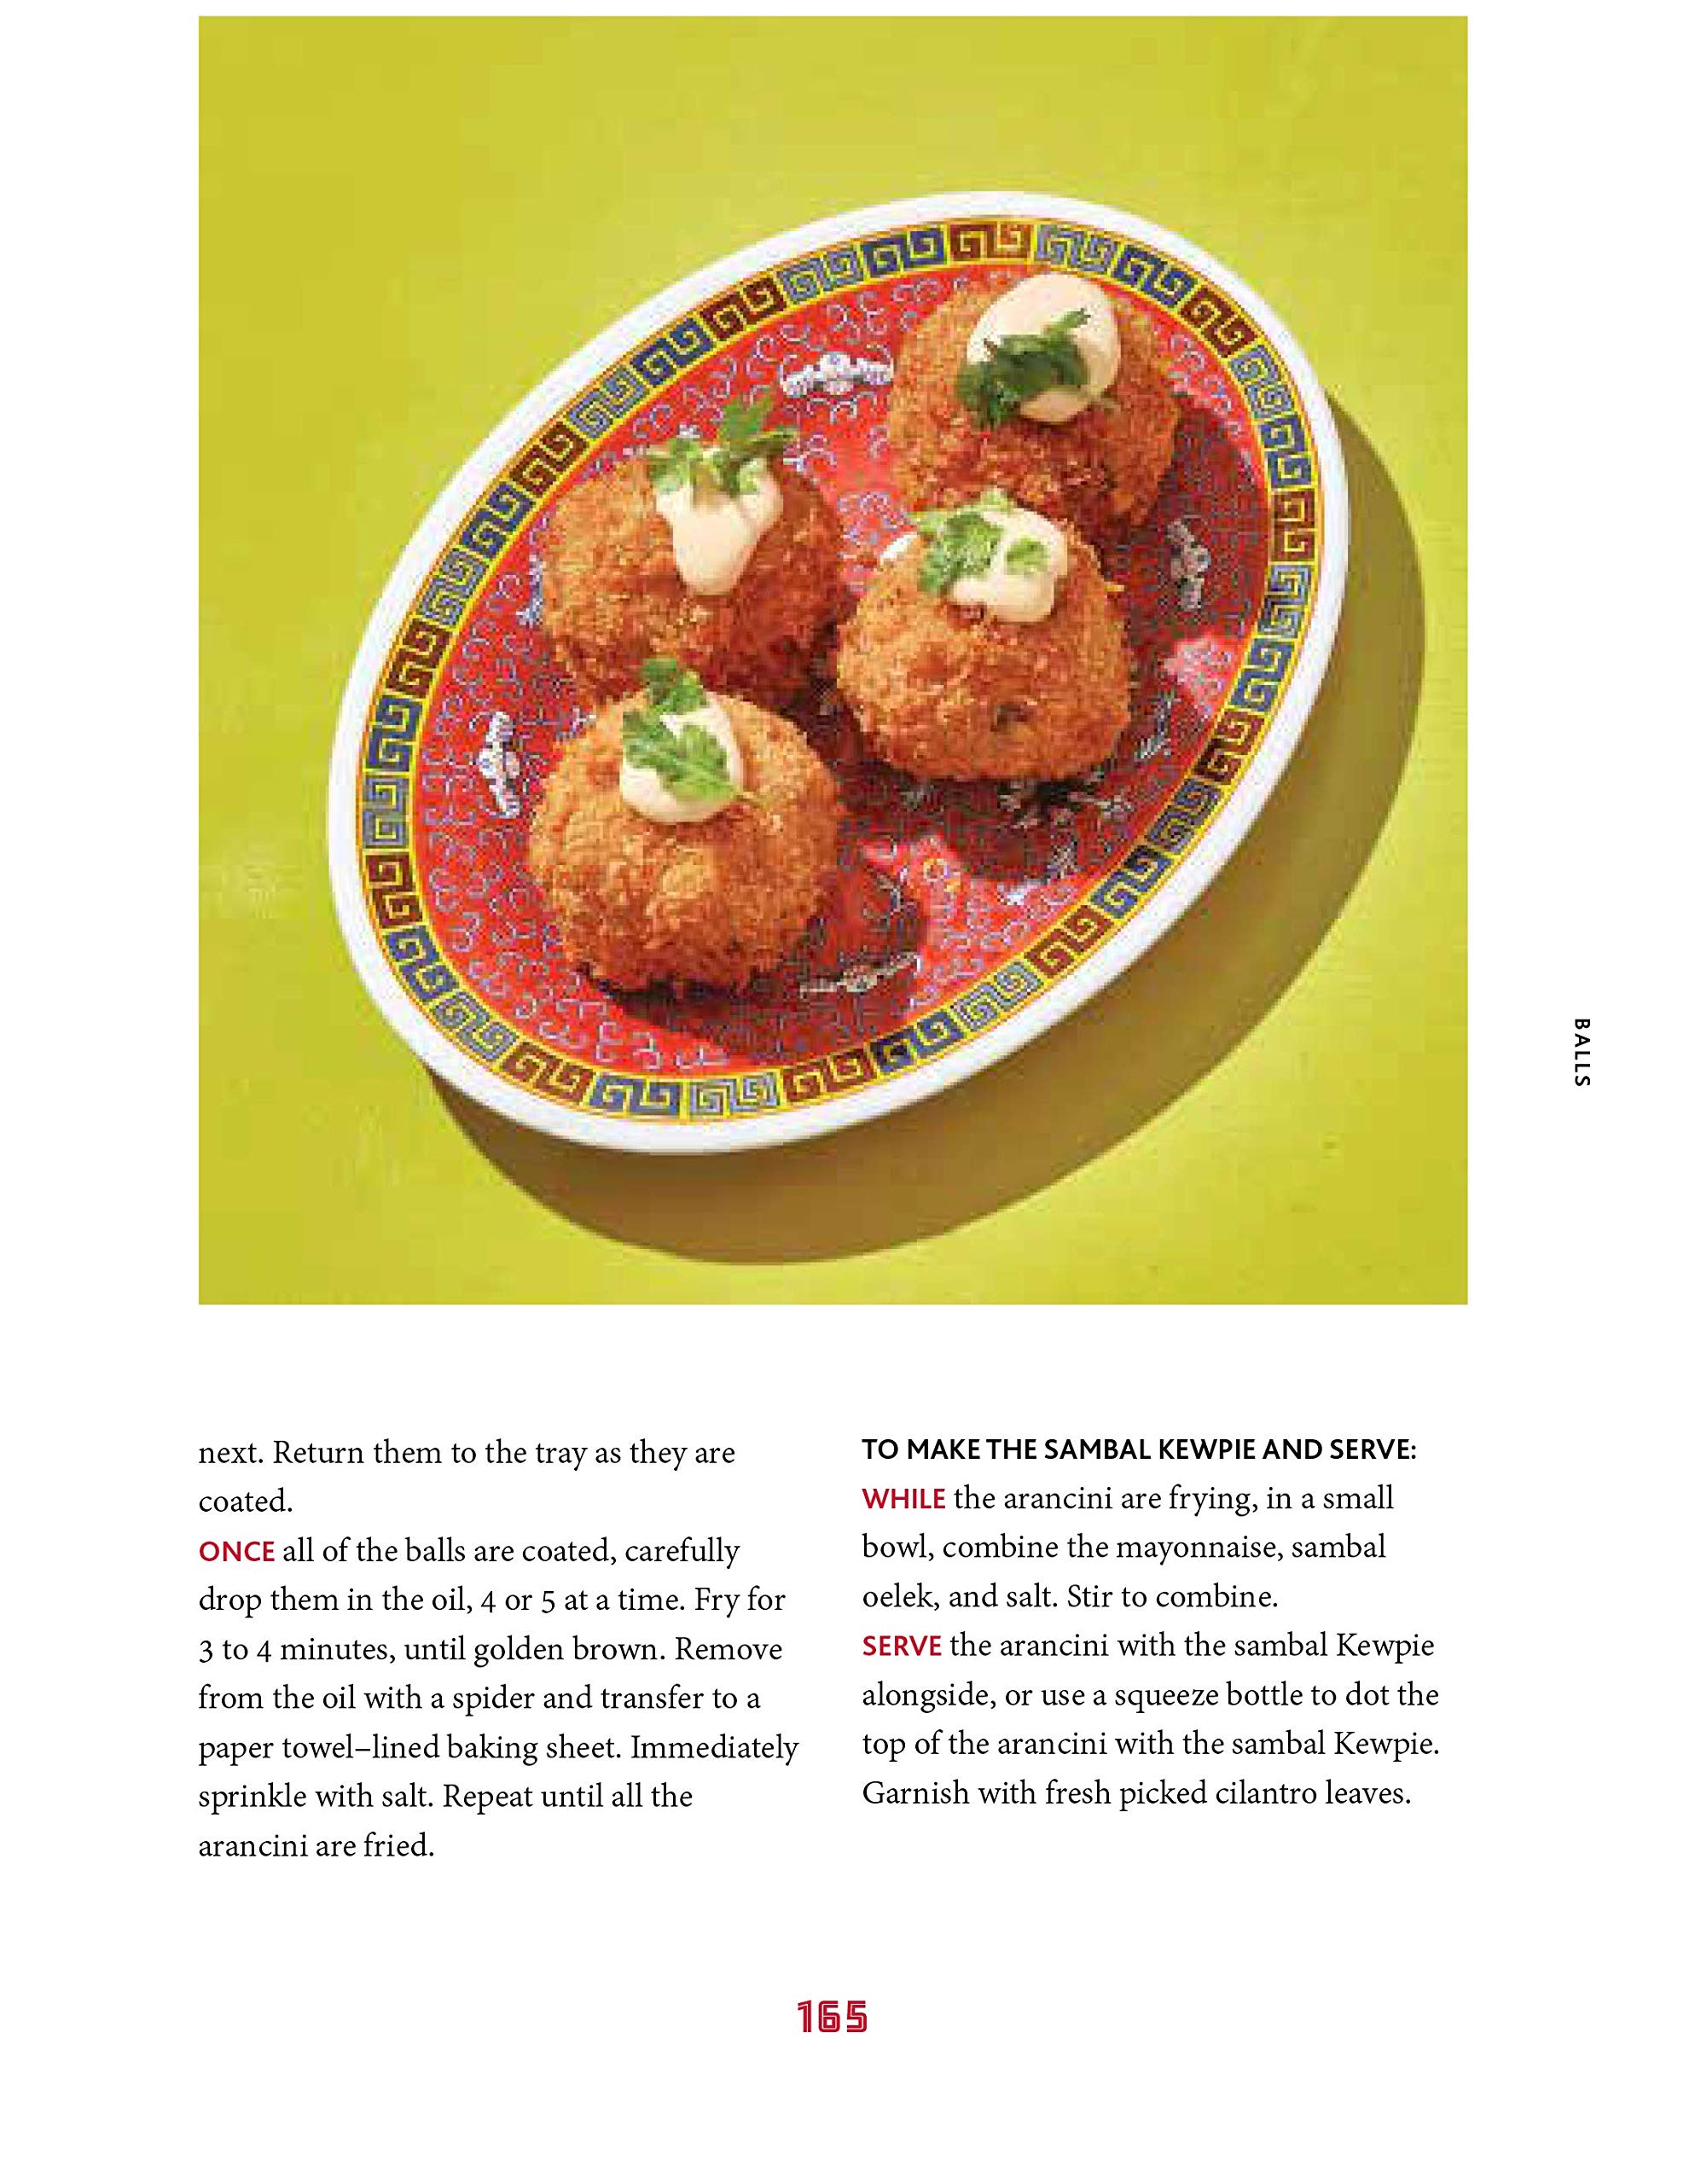 The Nom Wah Cookbook: Recipes and Stories from 100 Years at New York City's Iconic Dim Sum Restaurant (Wilson Tang)